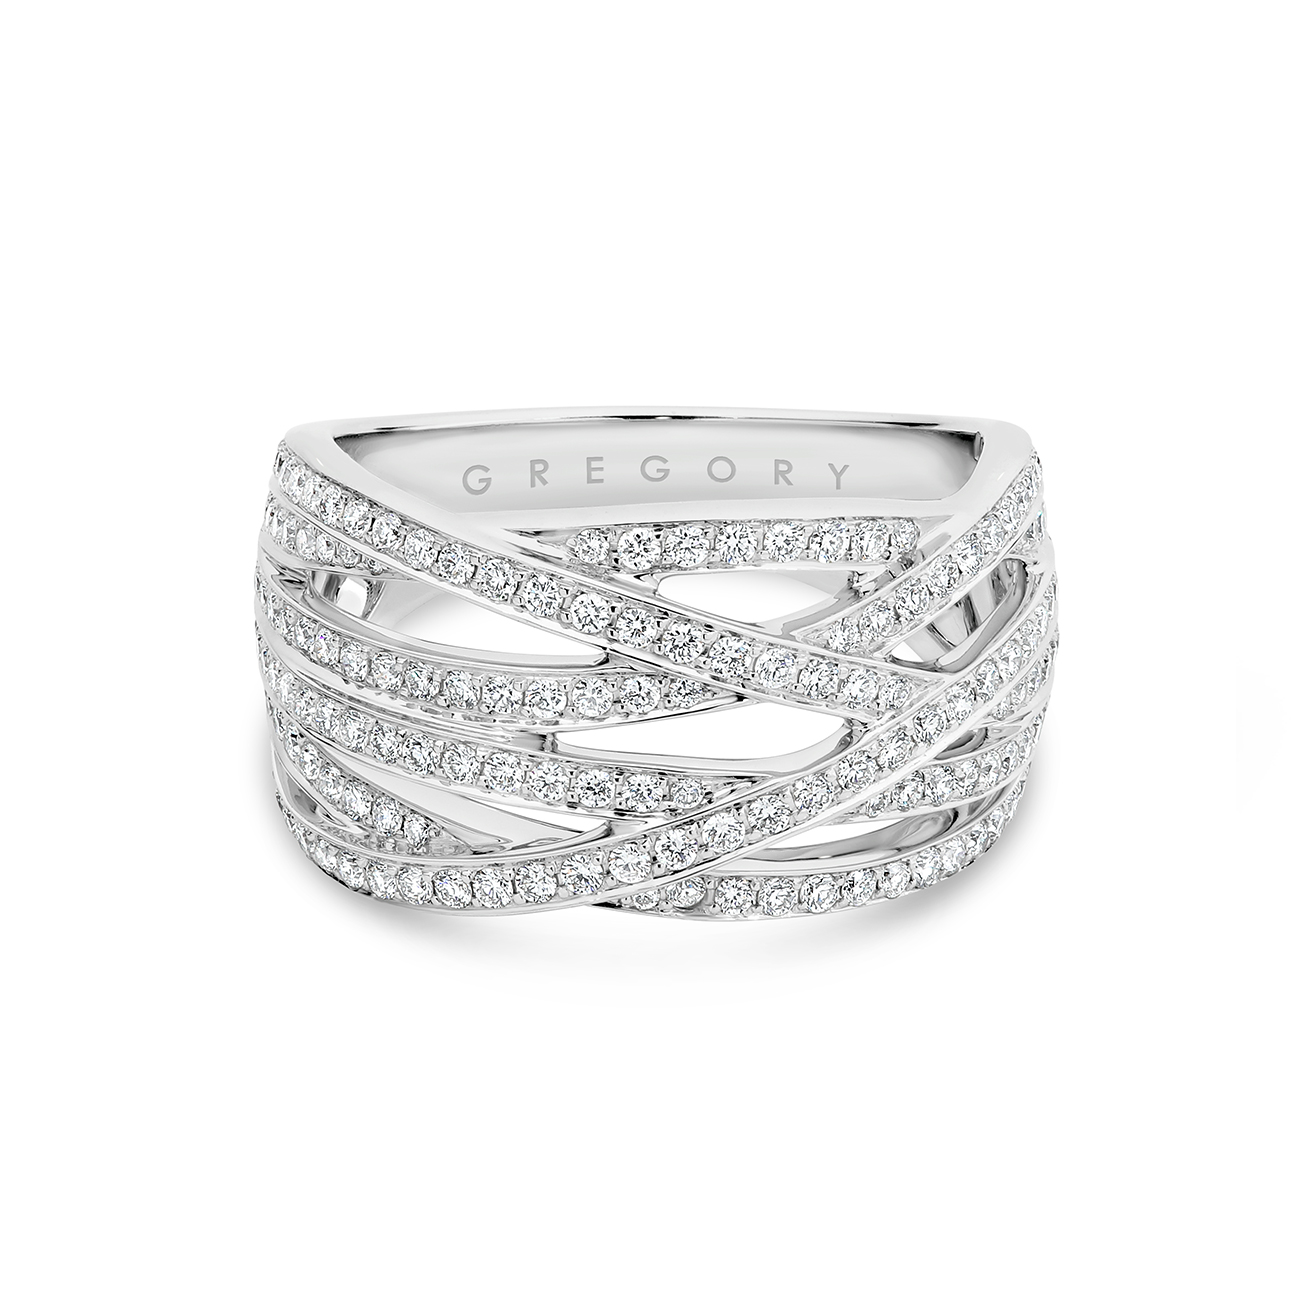 Grand Fancy Crossover Diamond Dress Ring in White Gold